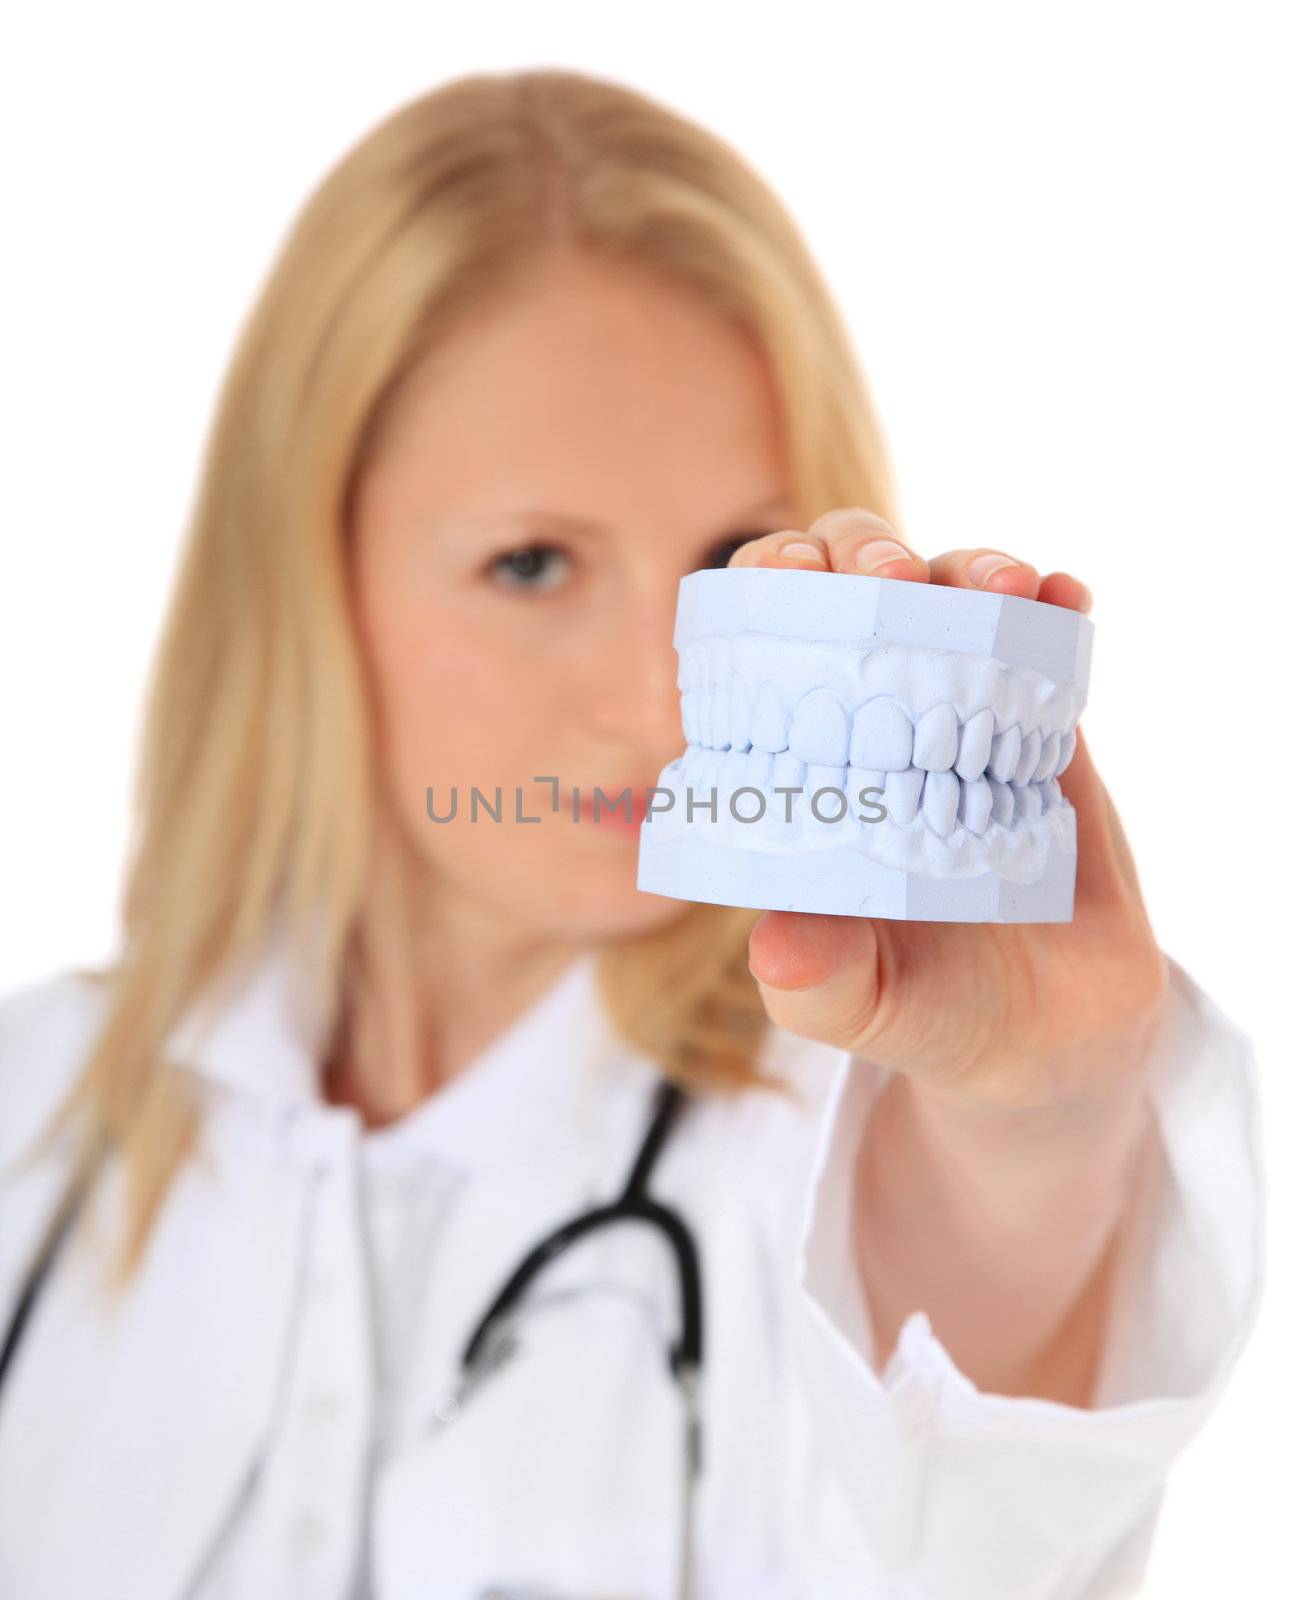 Dentist checking plaster cast of teeth. All on white background. Selective focus on teeth in foreground.